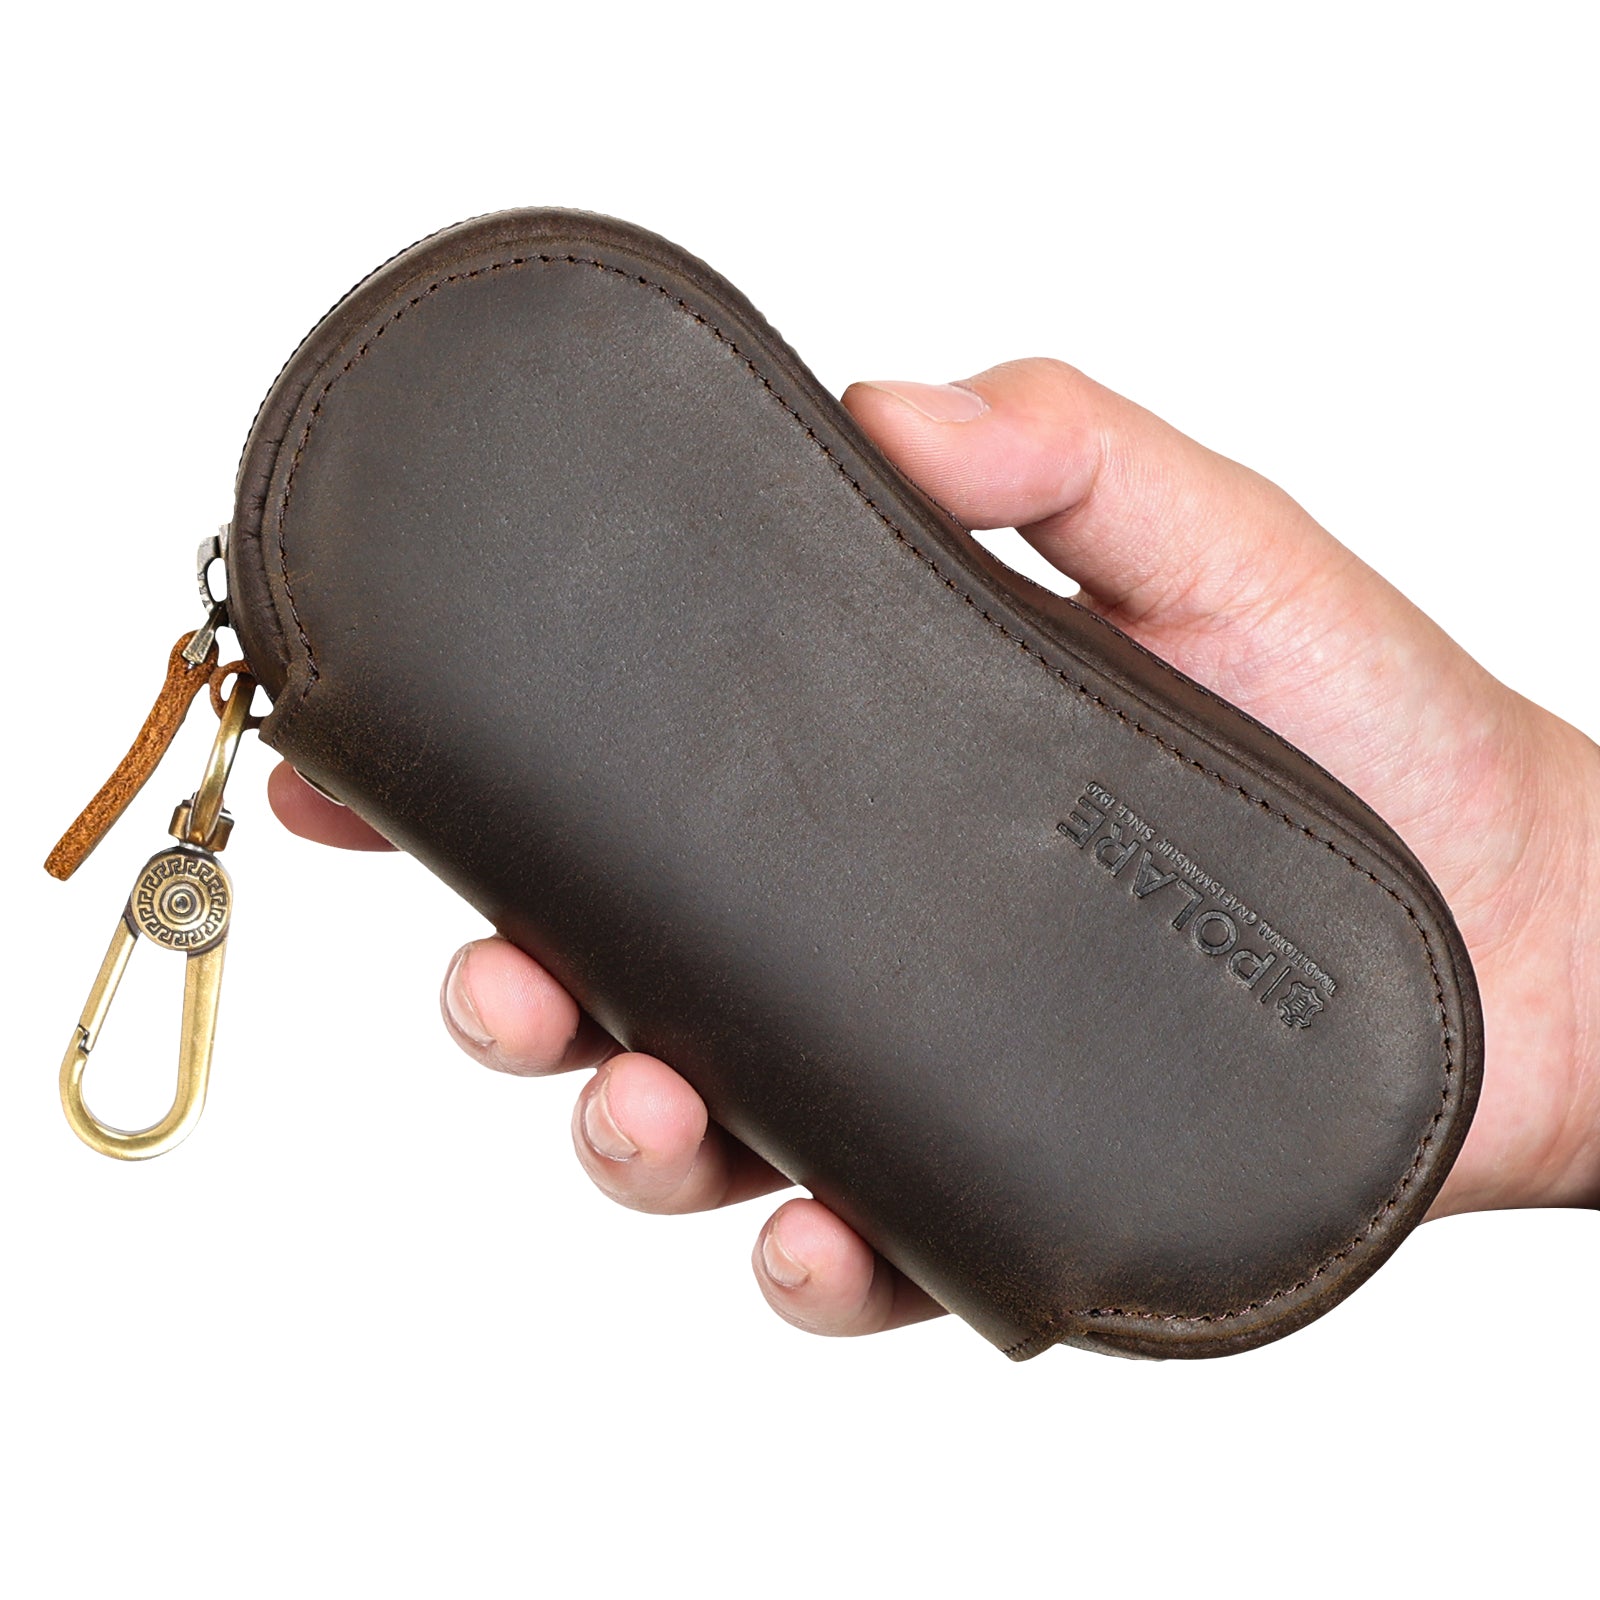 Full Grain Leather Glasses Case Safety Sunglasses Case with YKK Zipper